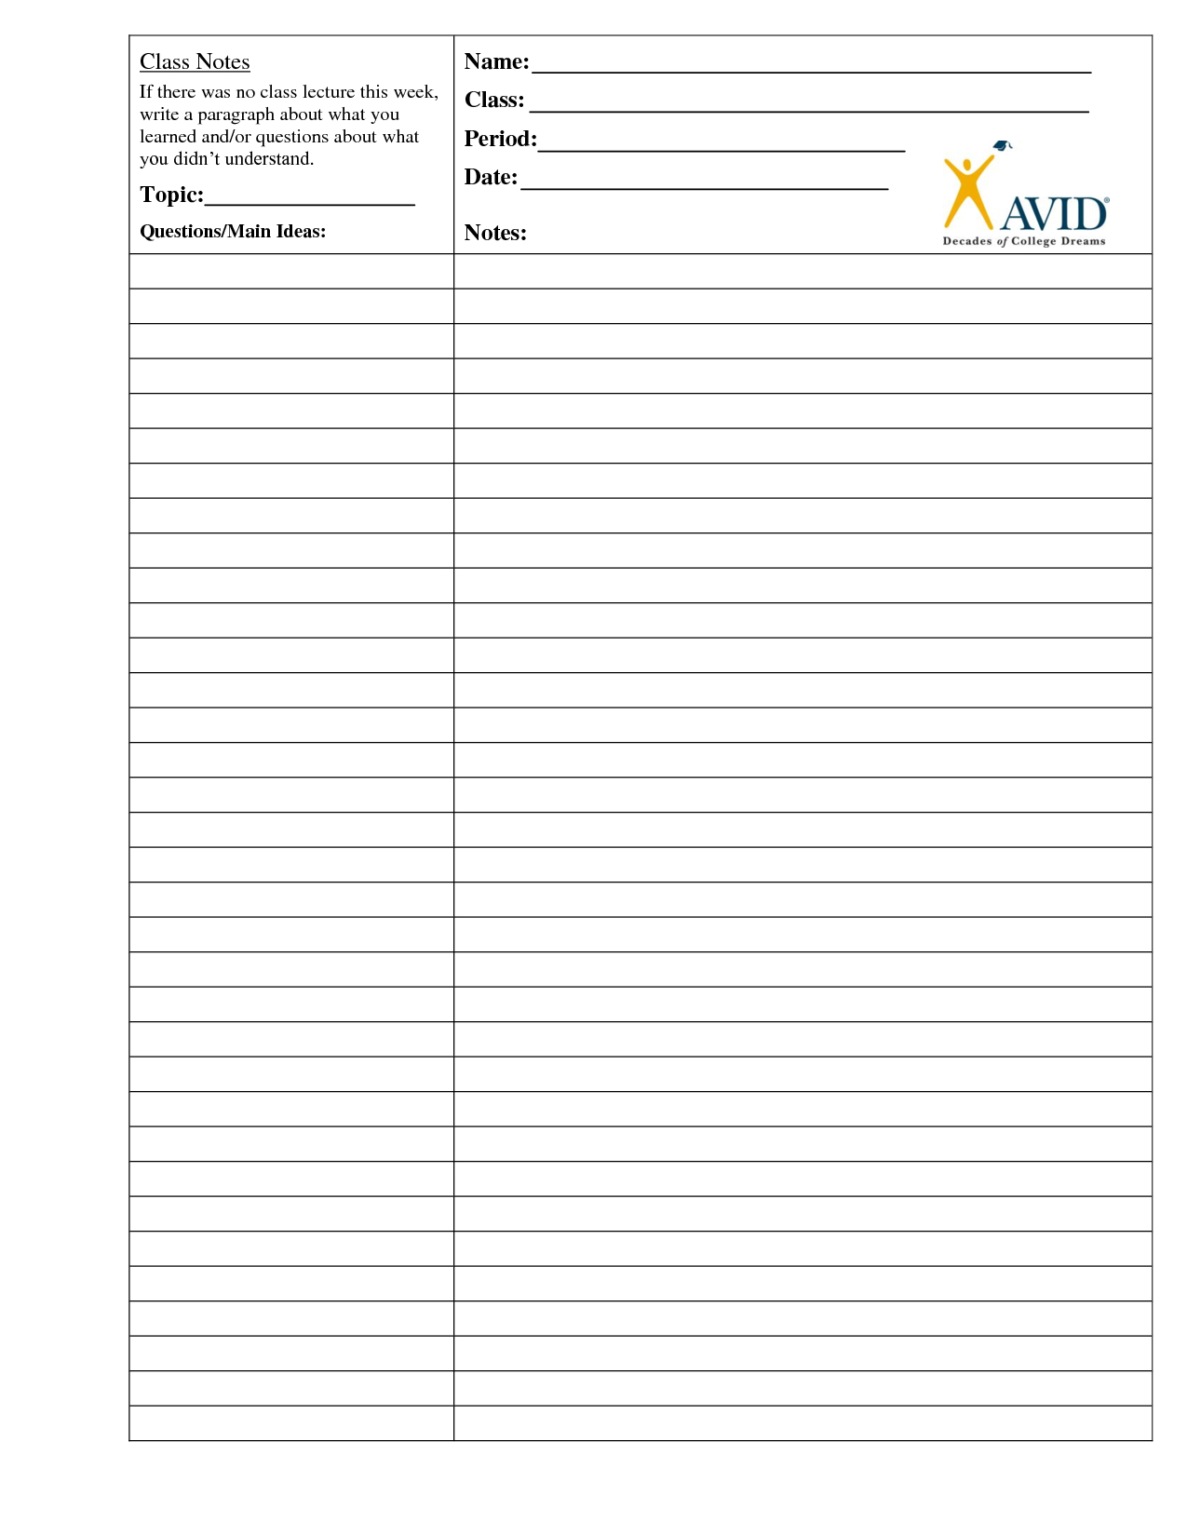 avid-cornell-notes-template-word-hozzt-within-note-taking-template